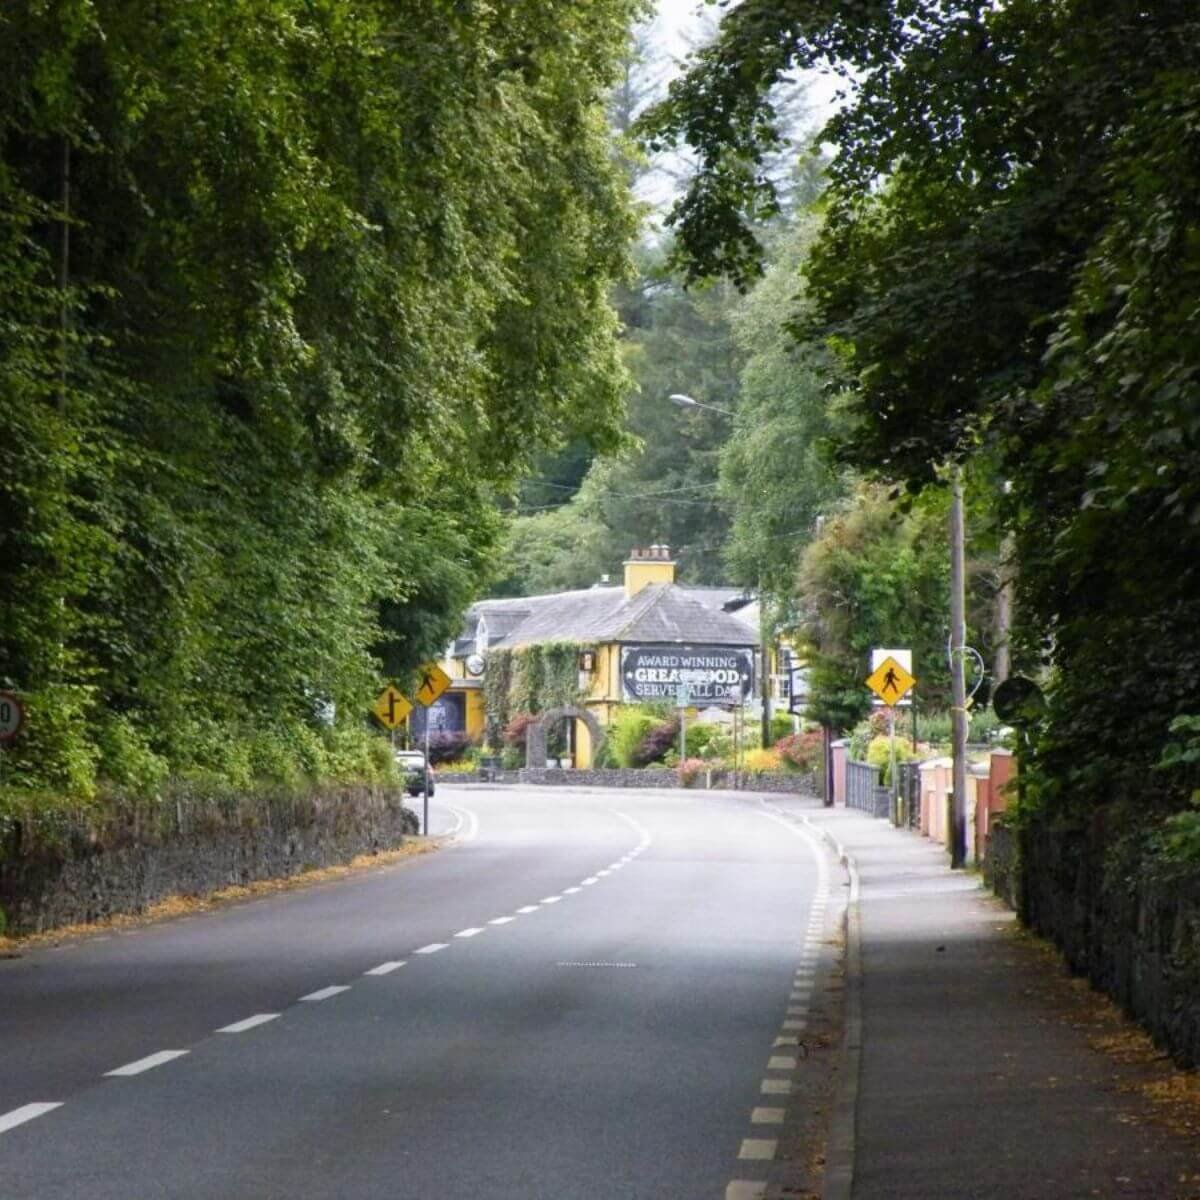 The road leading up to the mills inn, with trees on either side